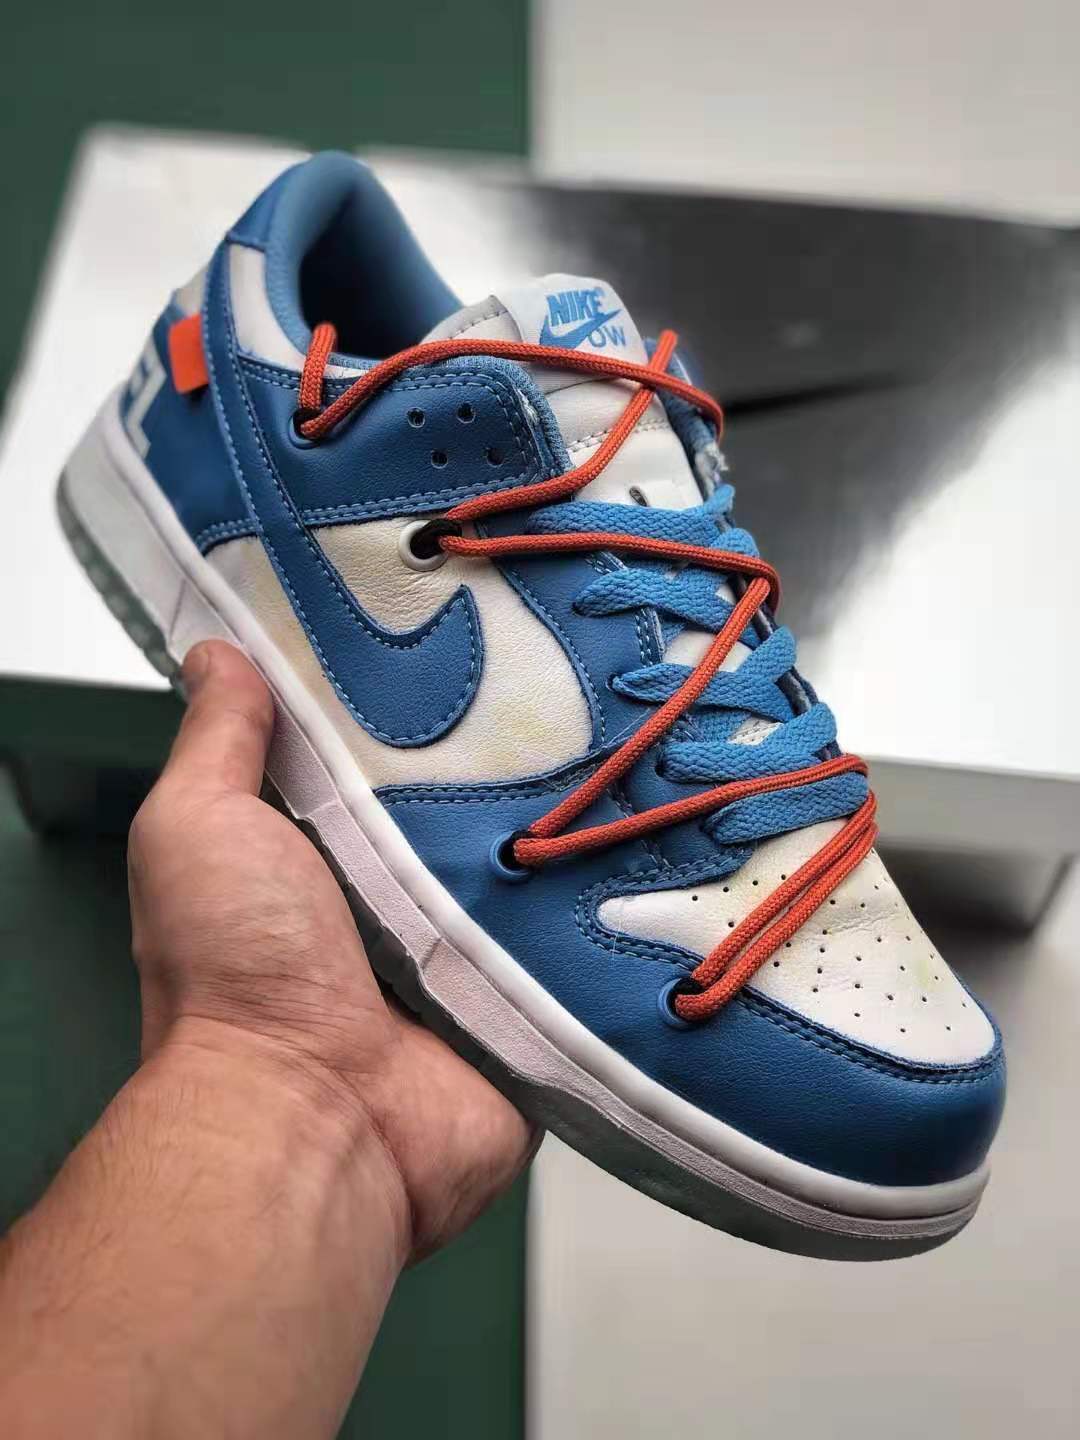 OFF-WHITE x Futura x Nike Dunk SB BQ6817-099: Exclusive Collaborative Sneakers at Affordable Prices!